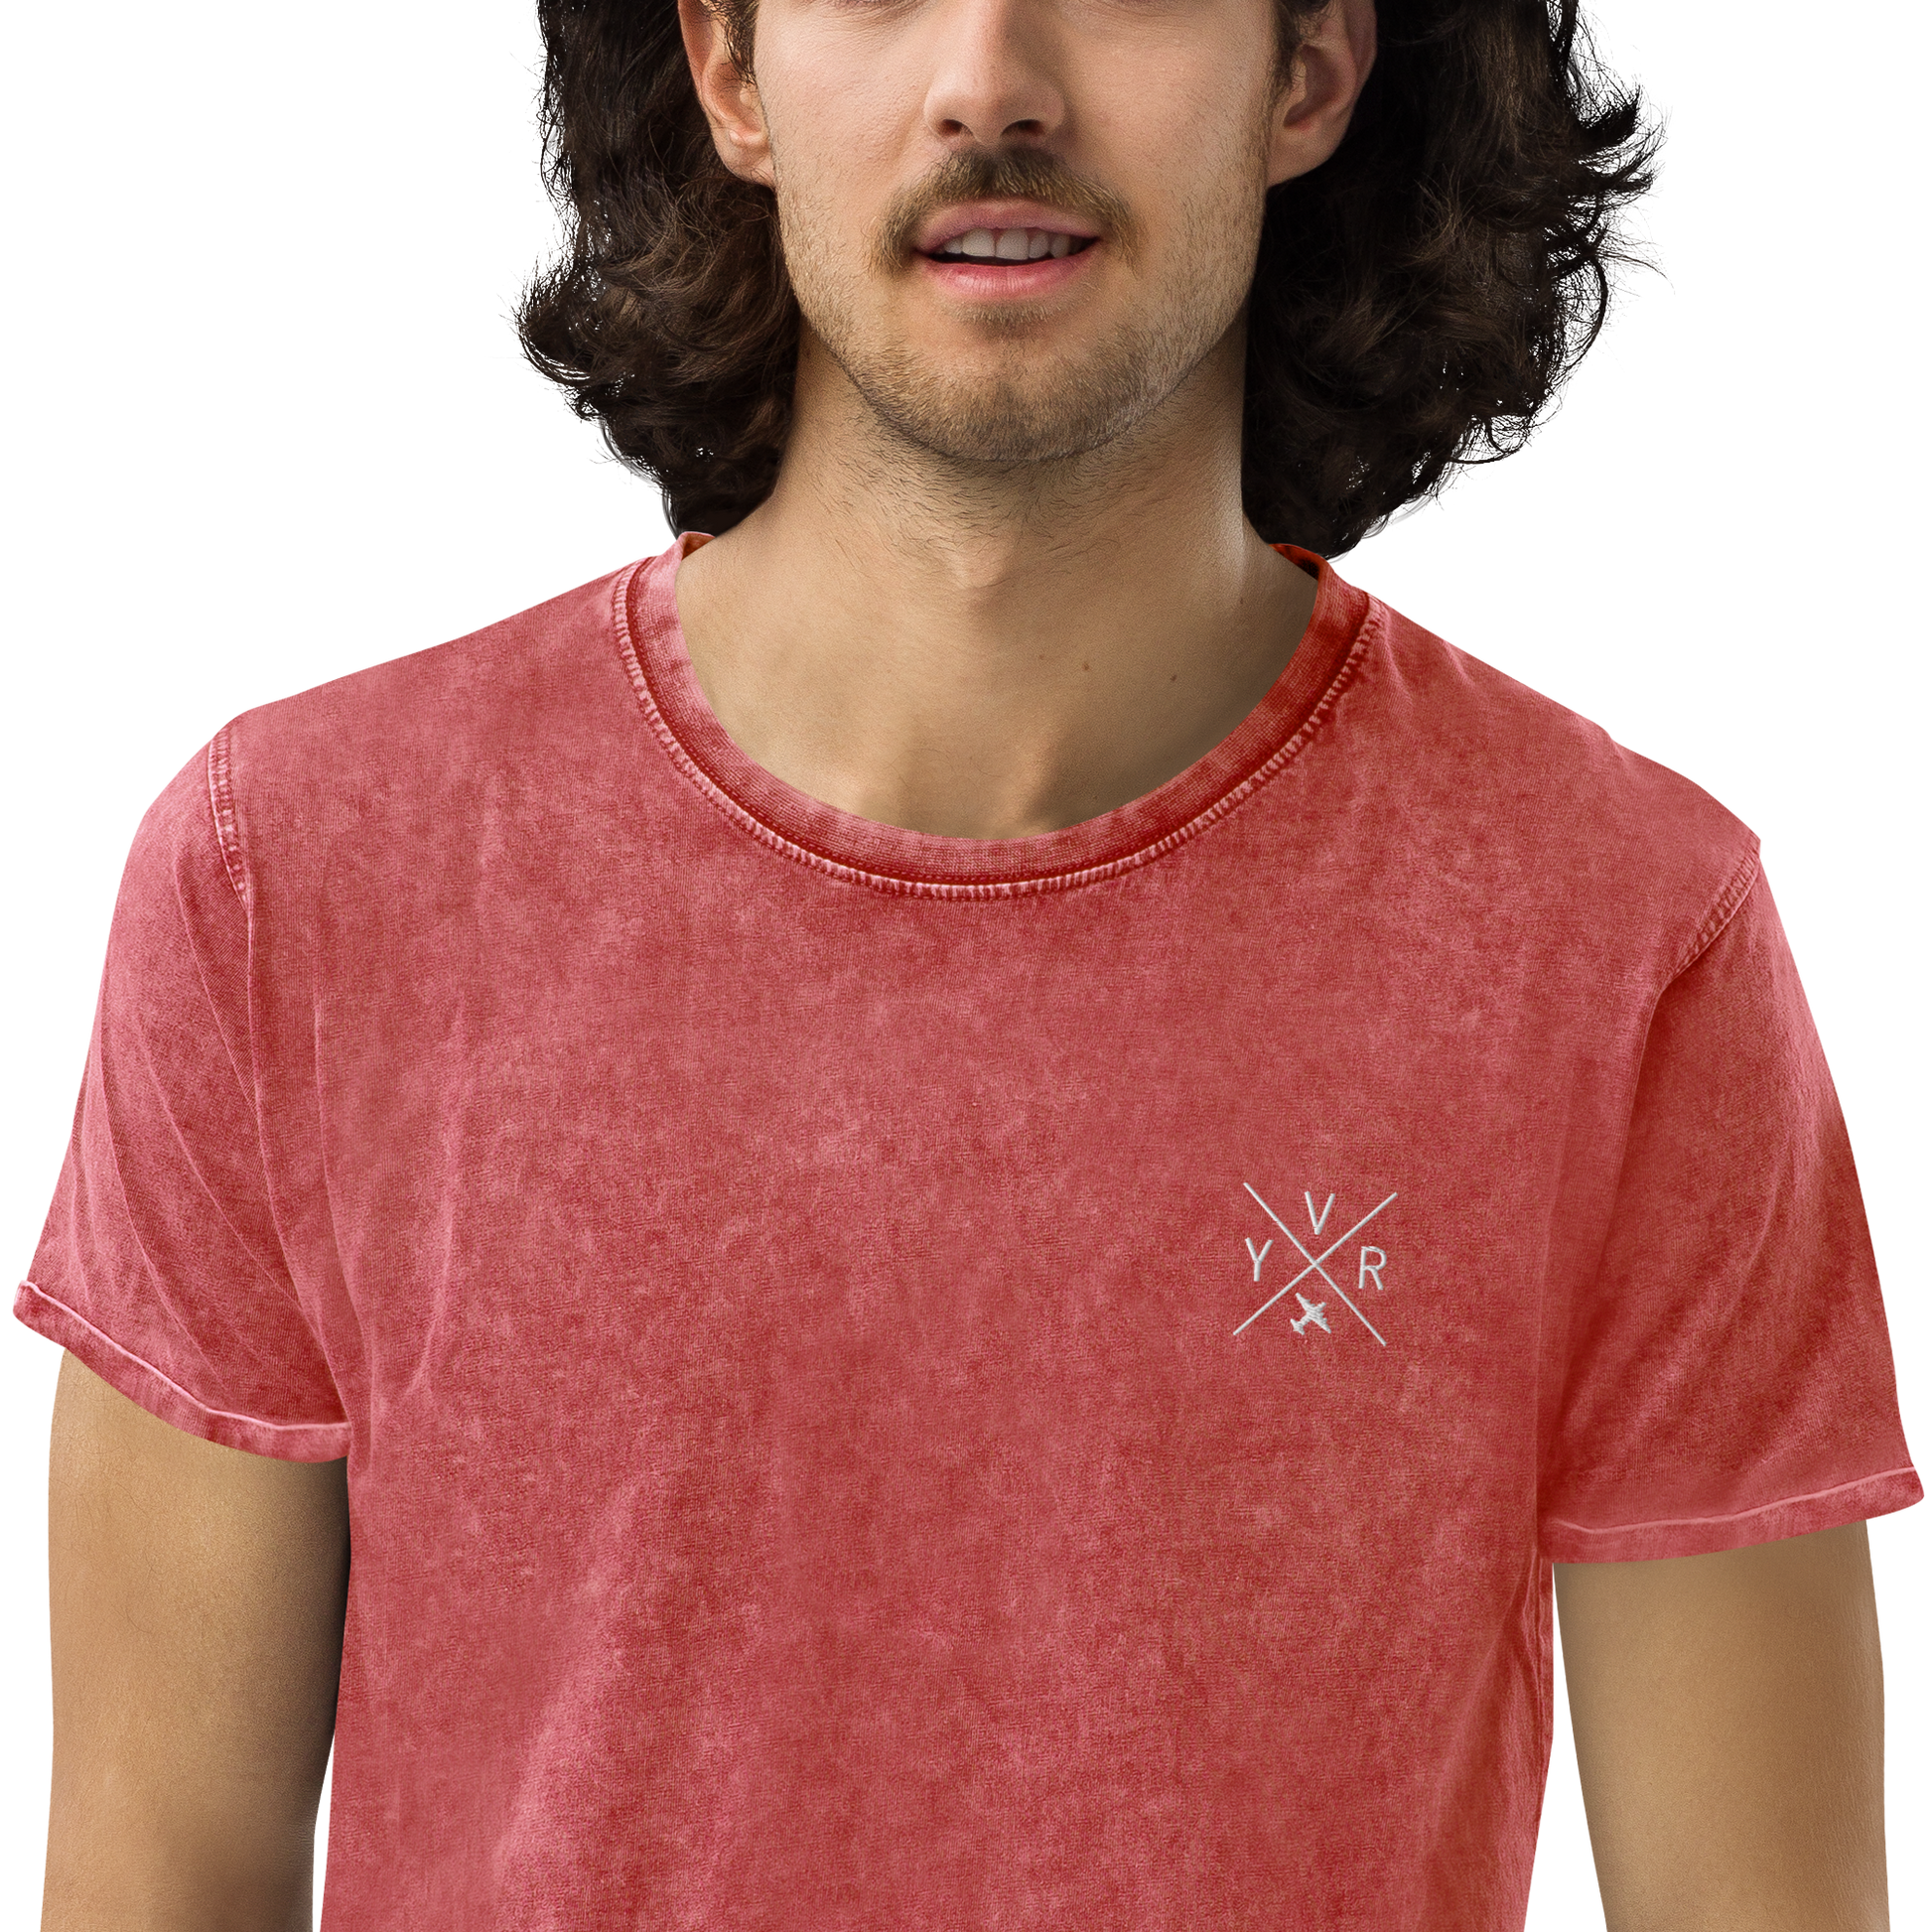 YHM Designs - YVR Vancouver Denim T-Shirt - Crossed-X Design with Airport Code and Vintage Propliner - White Embroidery - Image 09